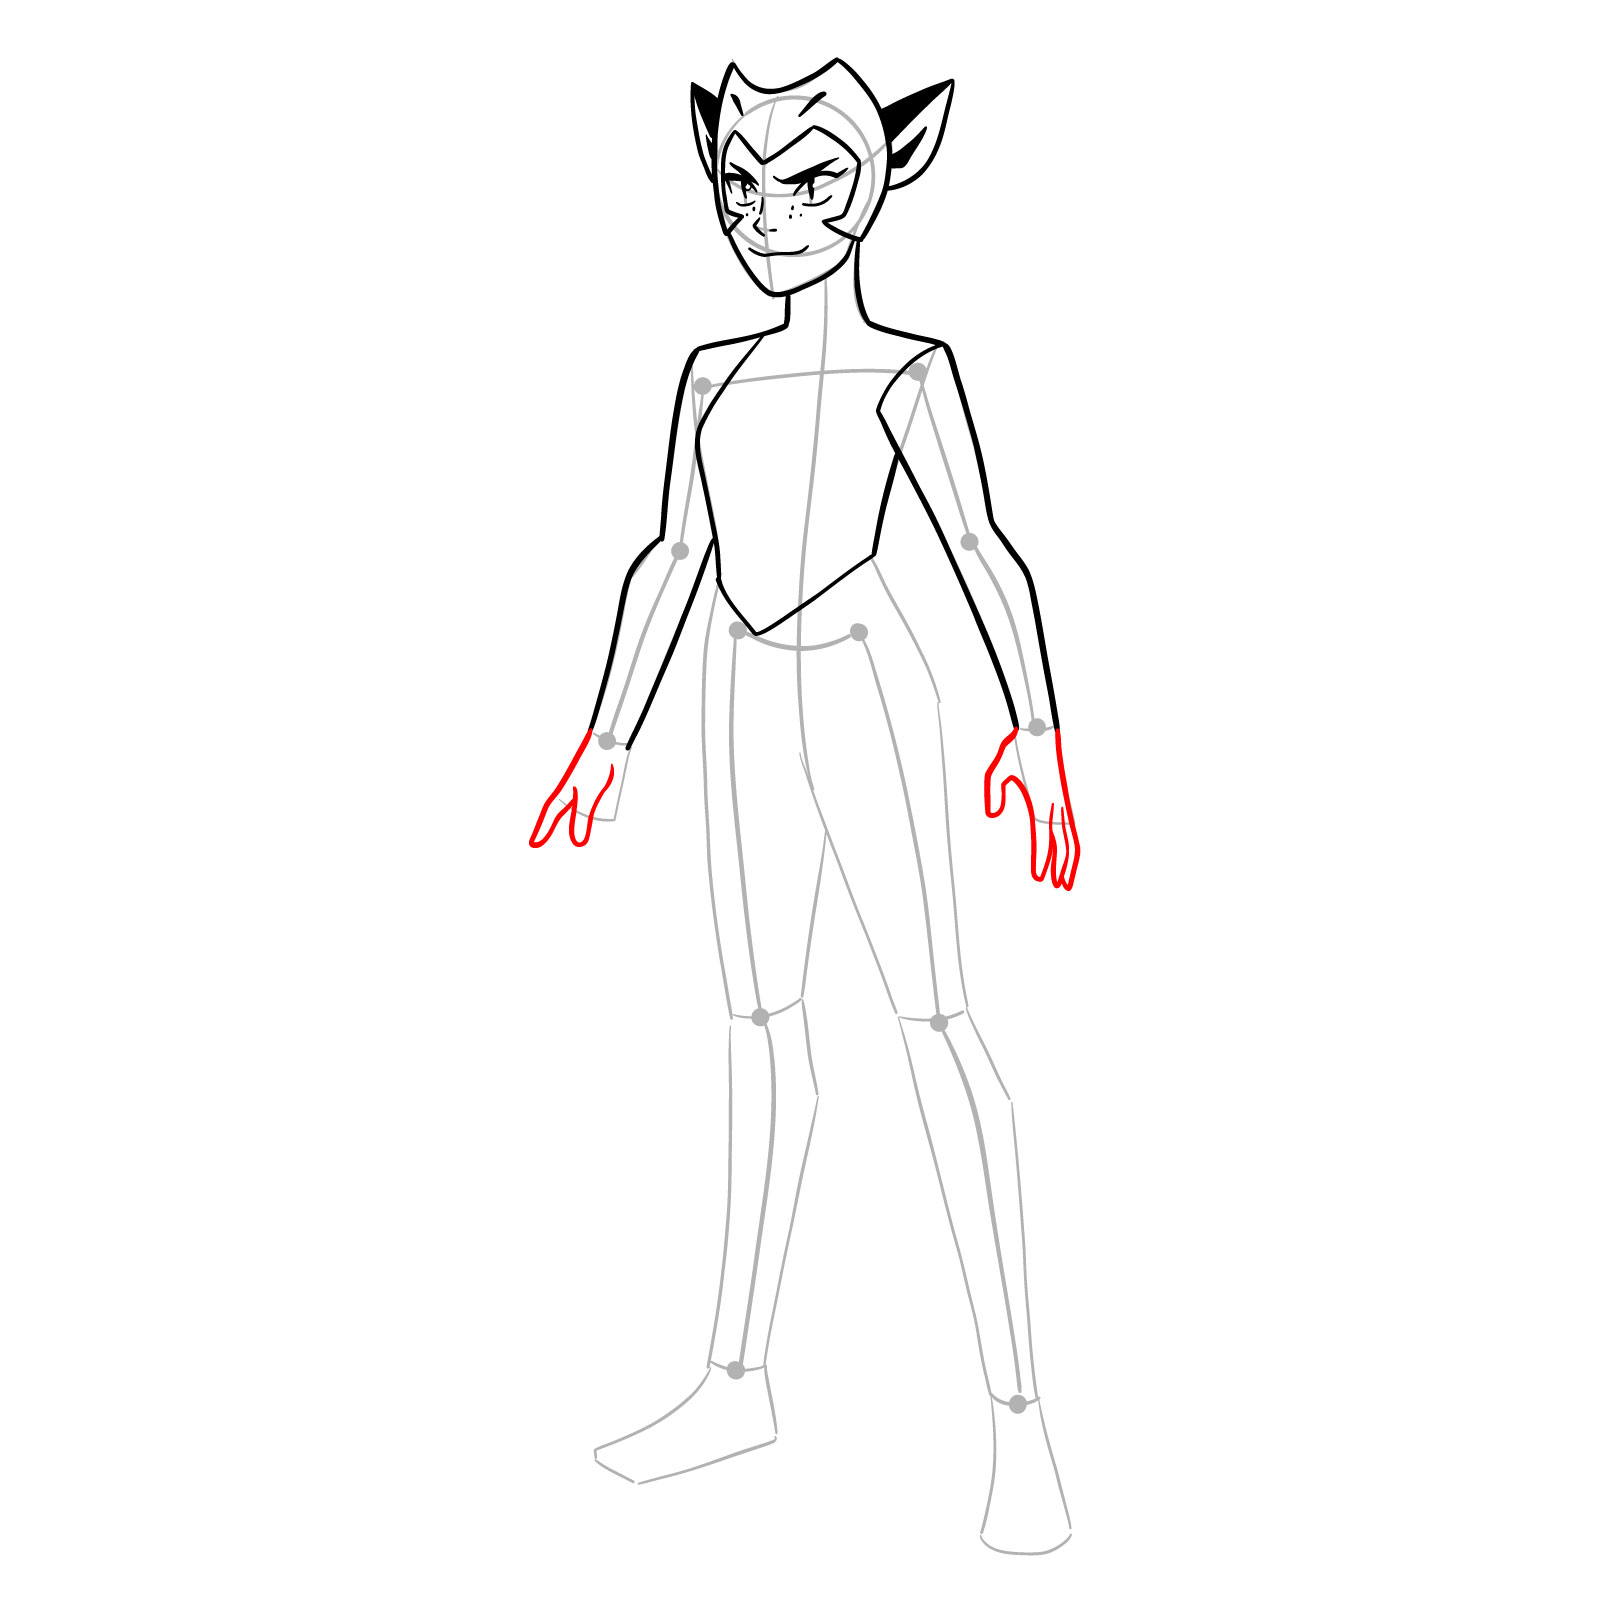 How to draw Catra from She-Ra and the Princesses of Power - step 11